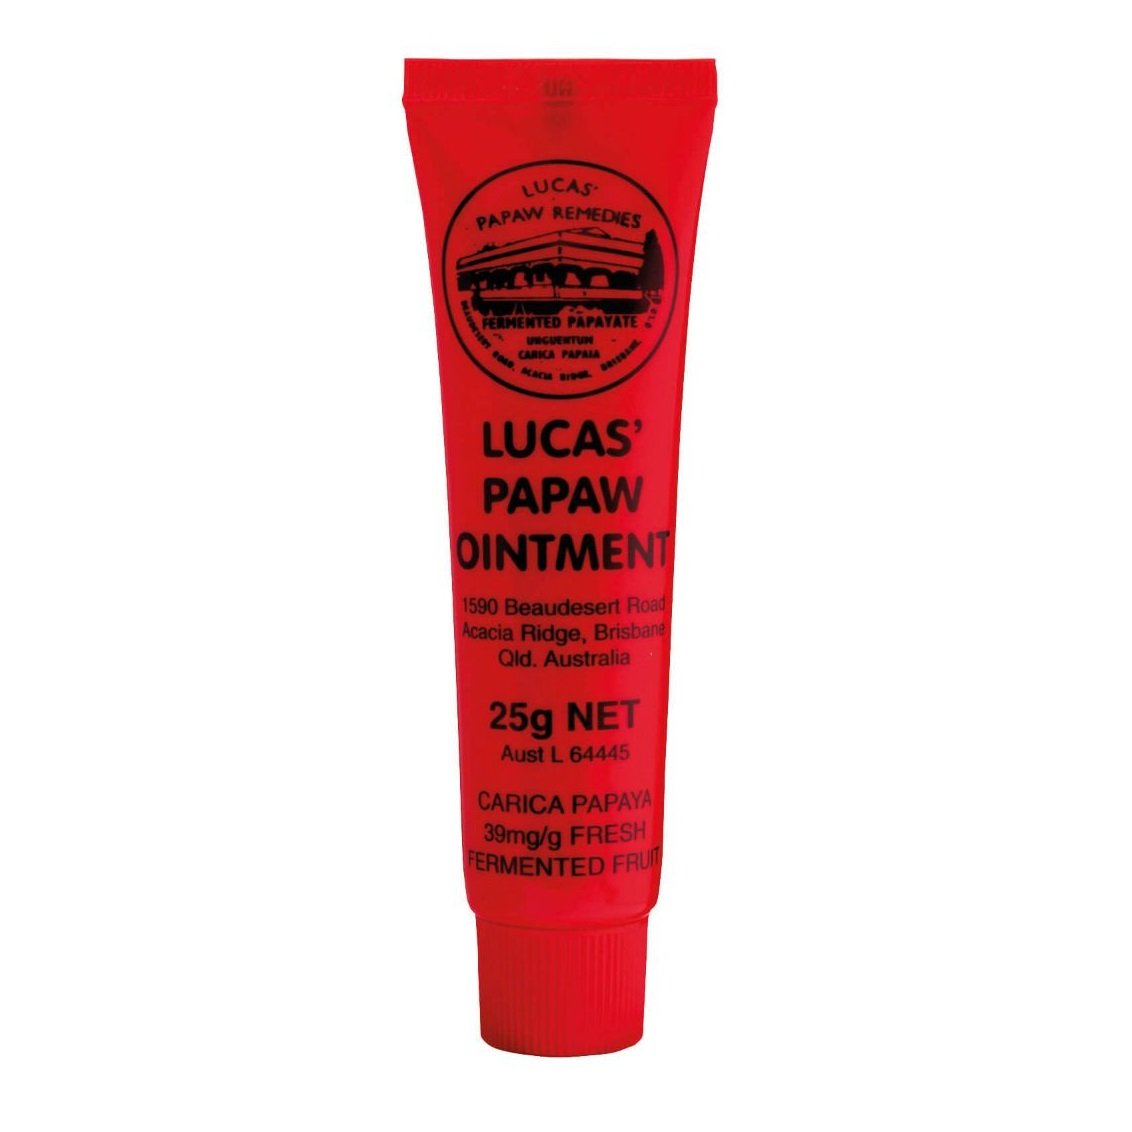 Lucas' Papaw Ointment 25g